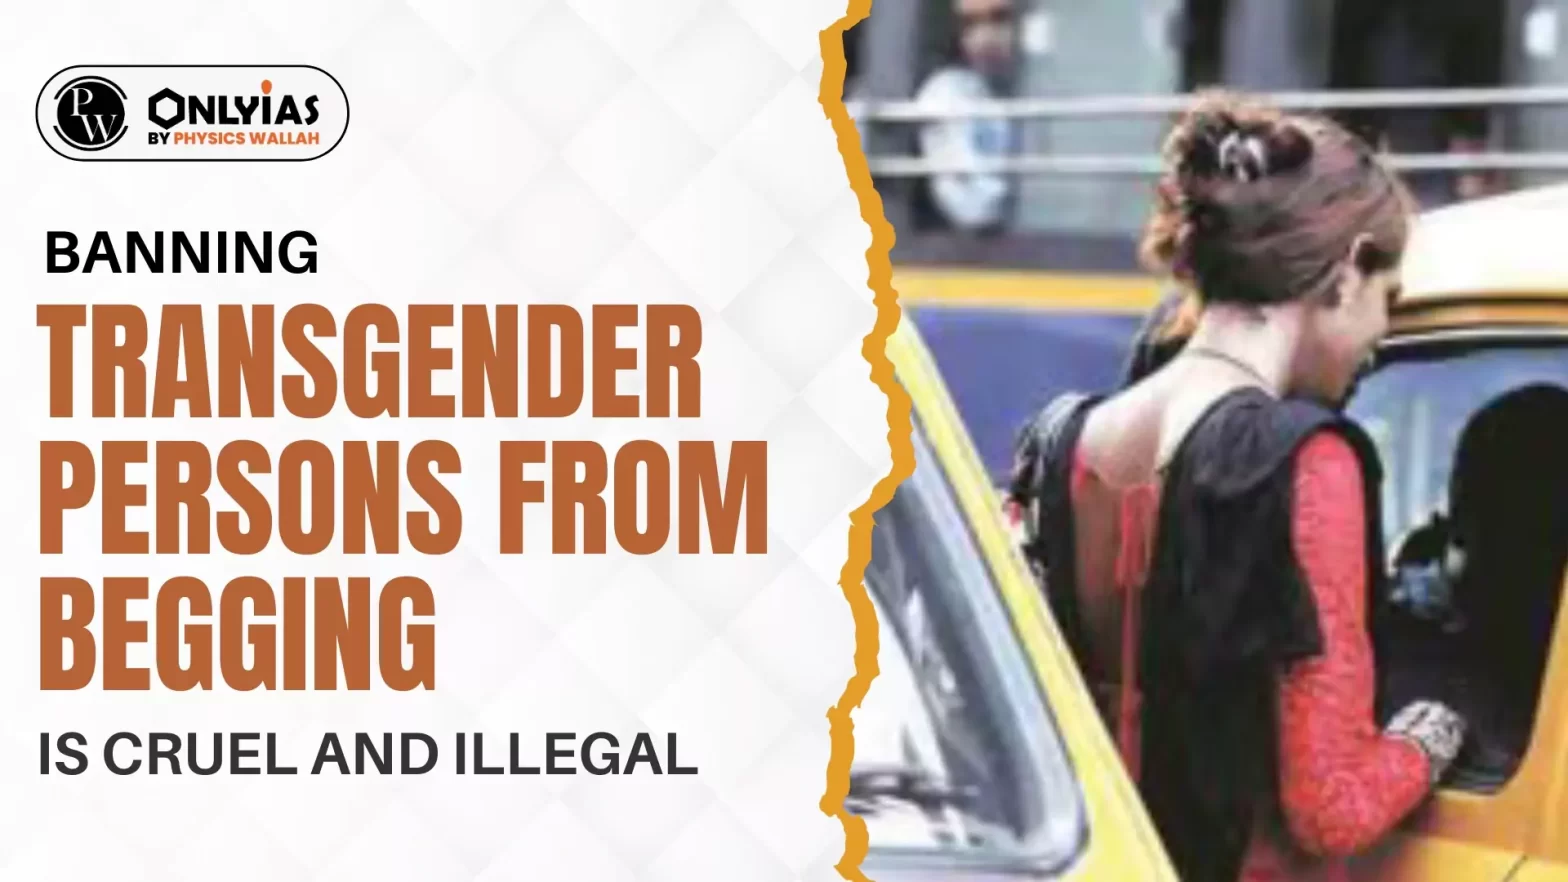 Banning Transgender Persons from Begging is Cruel and Illegal